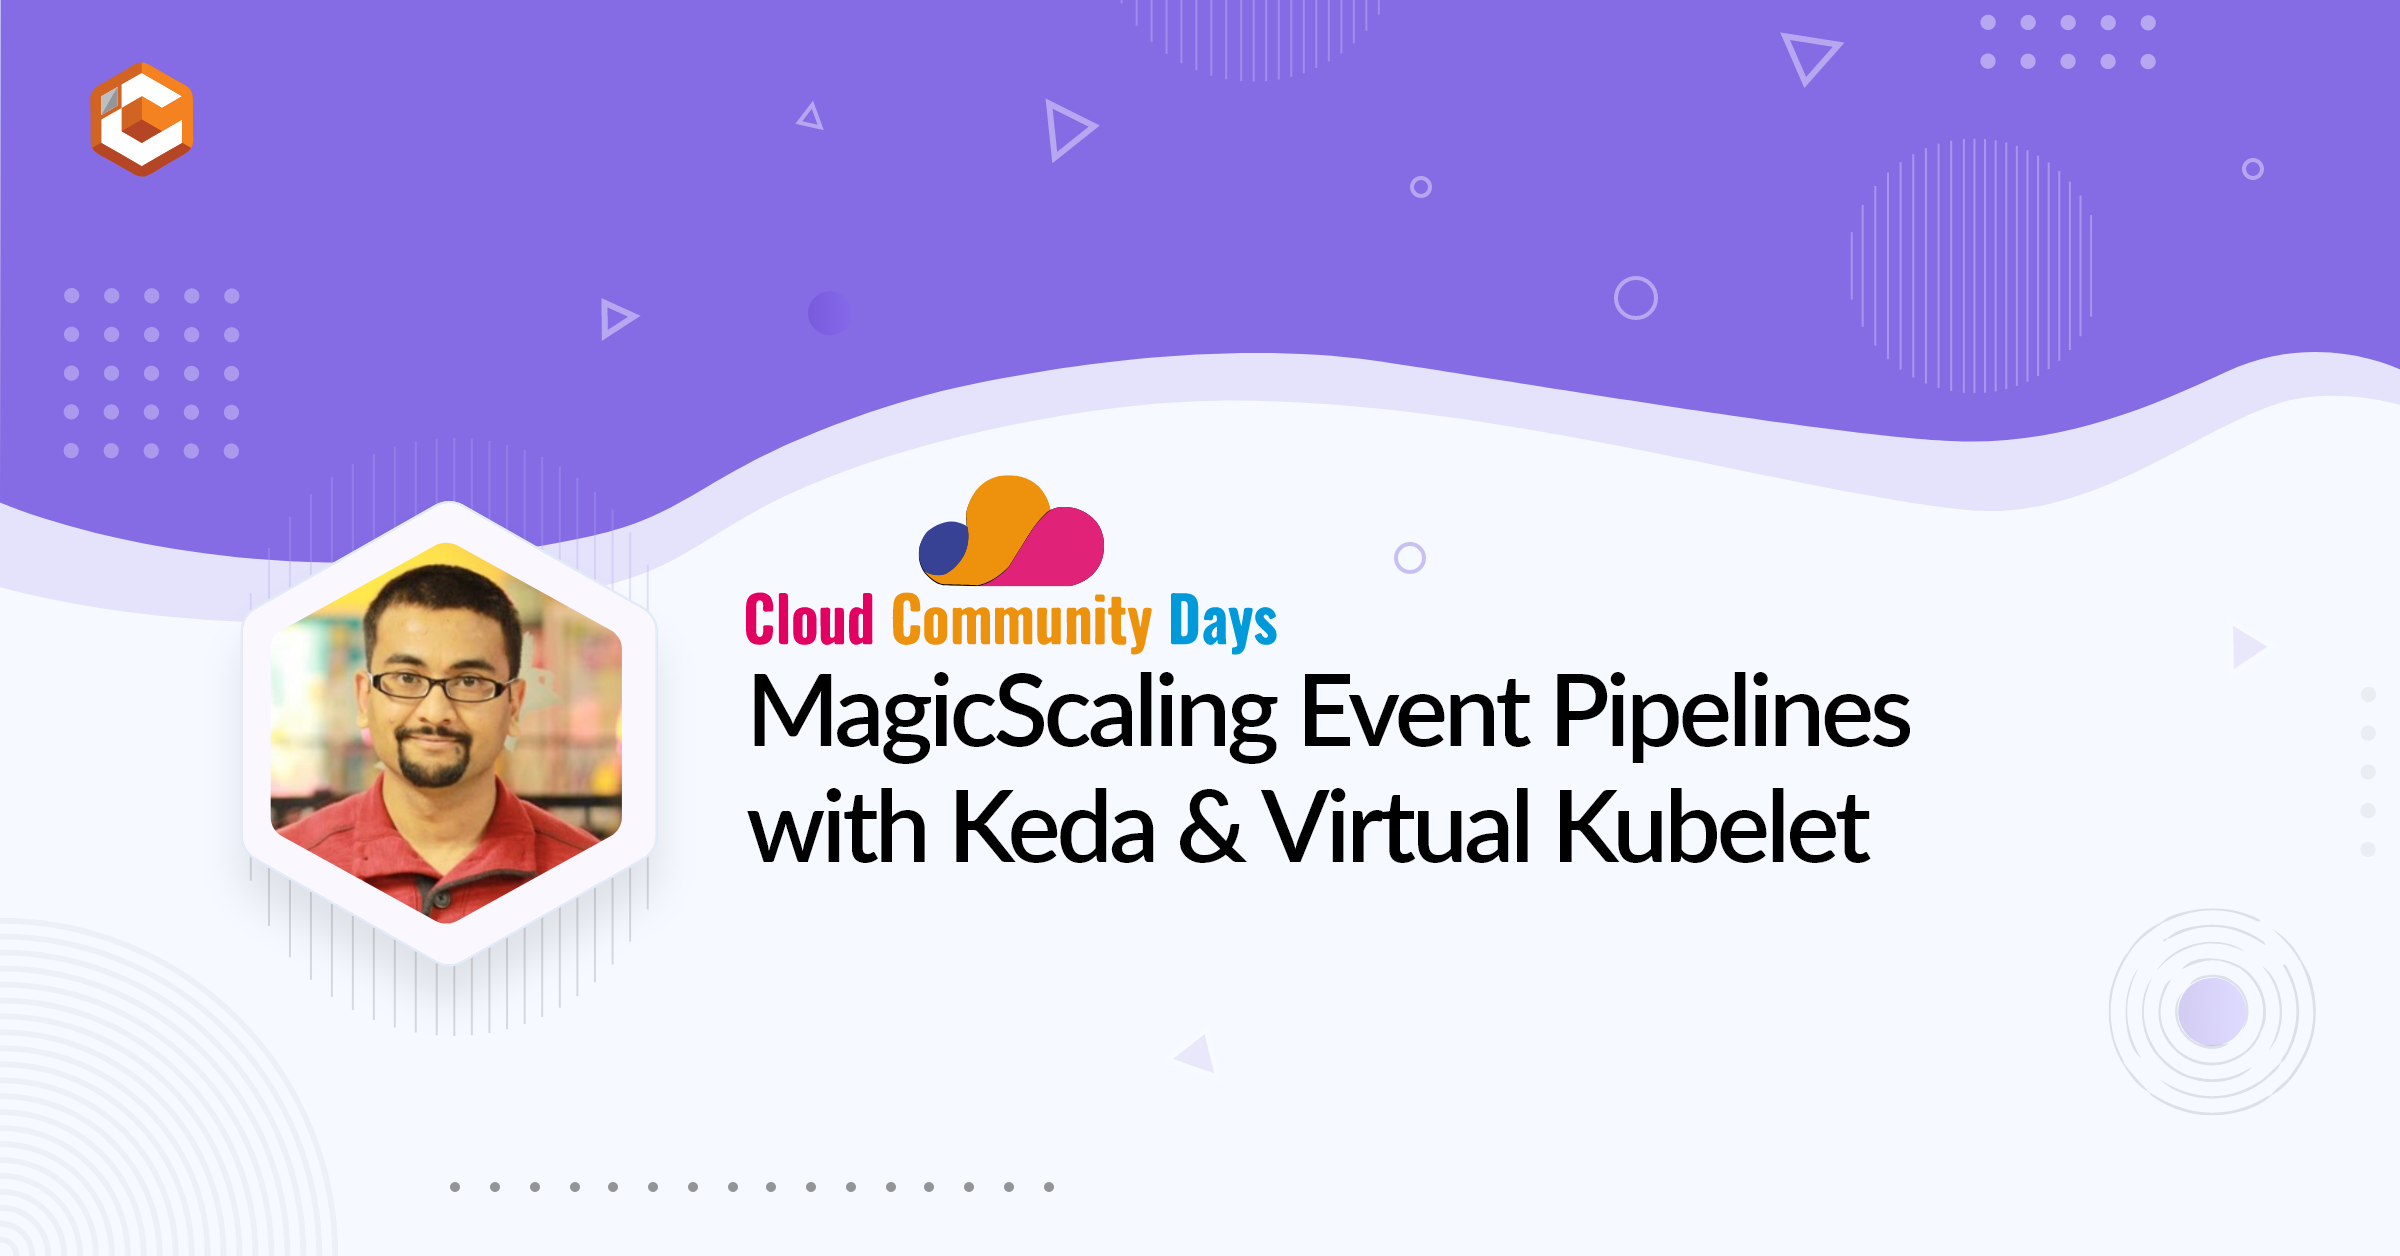 MagicScaling Event Pipelines with Keda & Virtual Kubelet